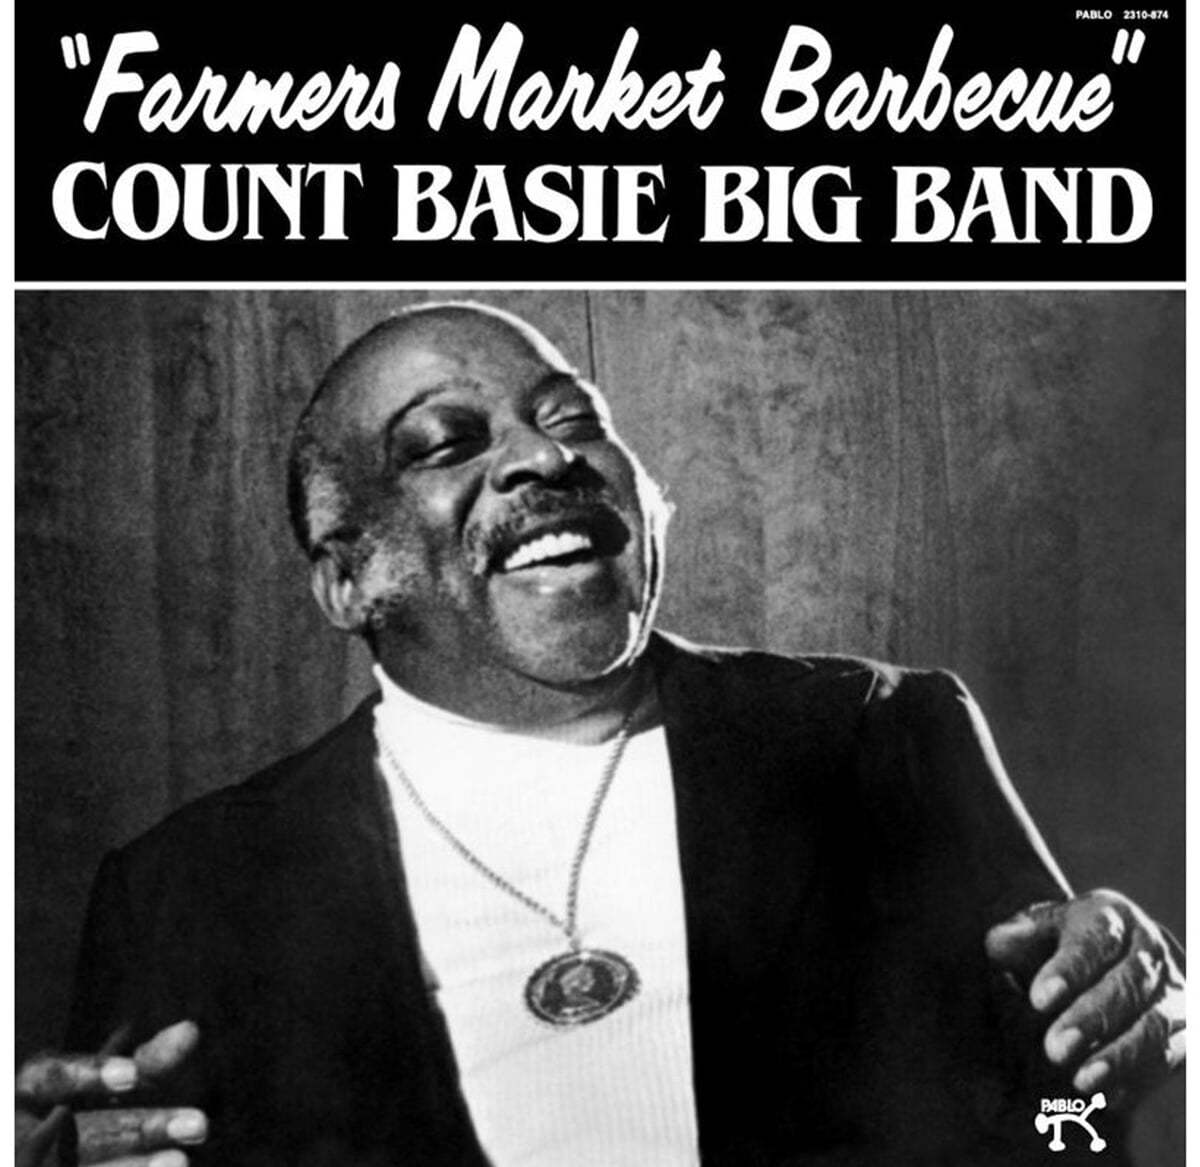 Count Basie Big Band (카운트 베이시) - Farmers Market Barbecue [LP]